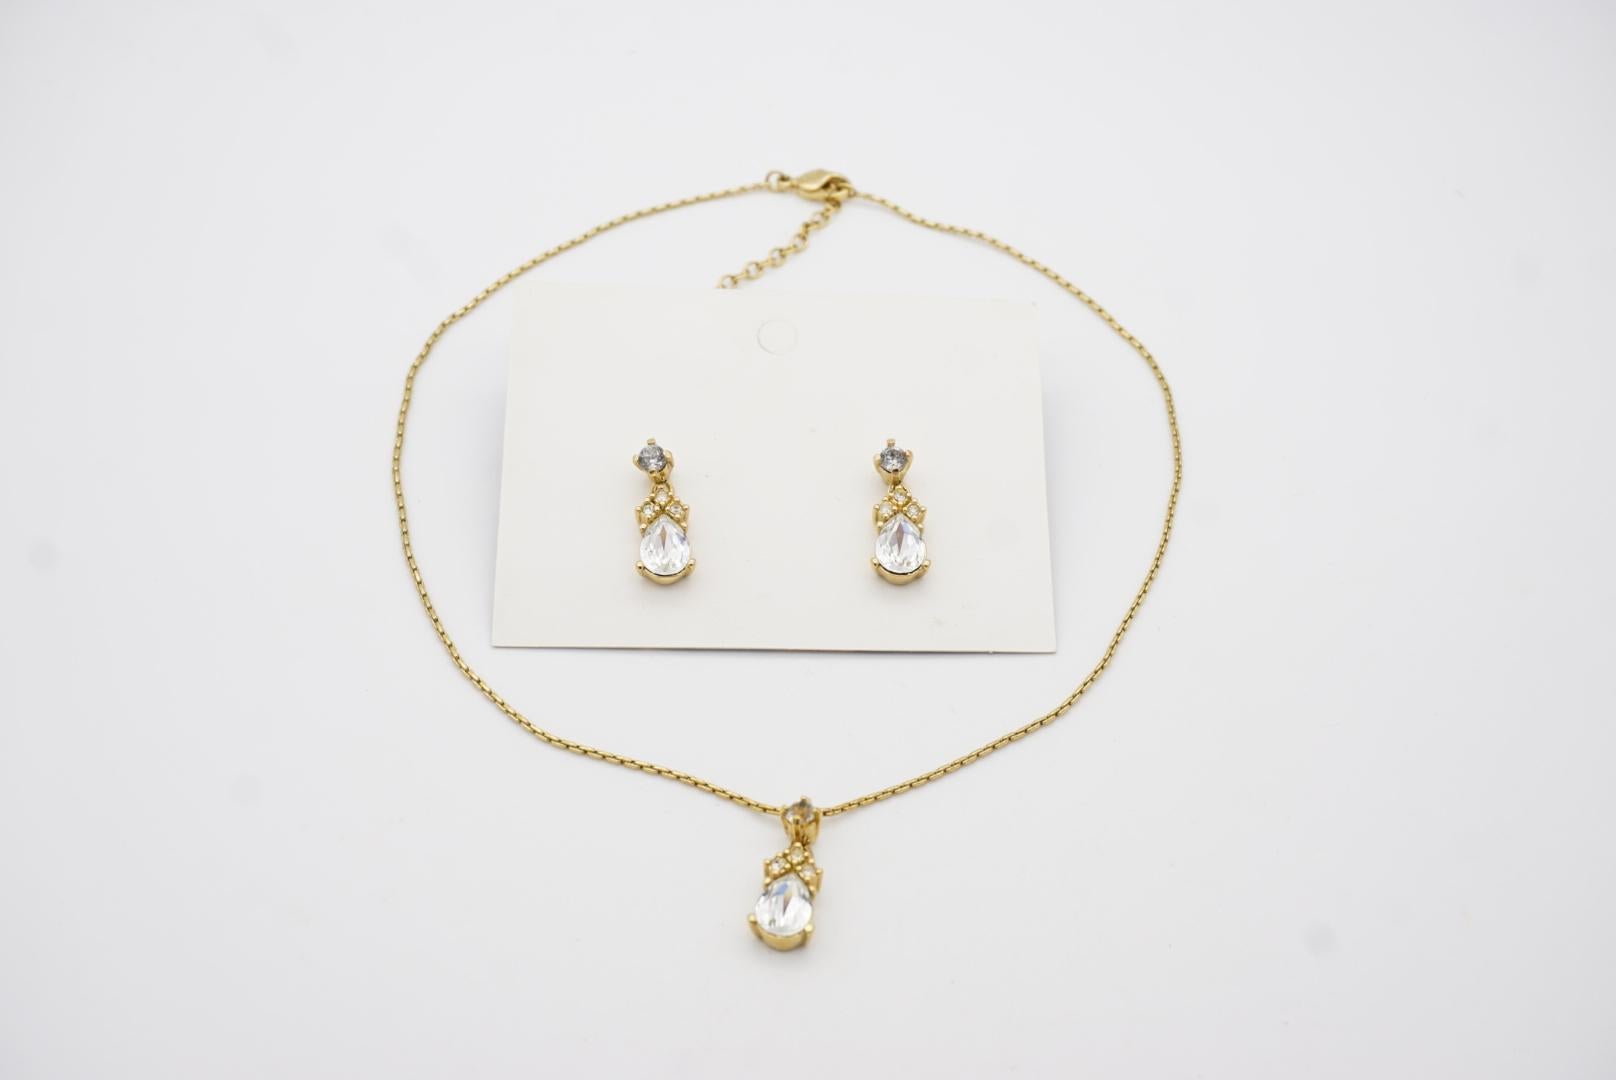 Christian Dior Vintage 1980s Crystal Water Tear Drop Set Gold Necklace Earrings For Sale 4